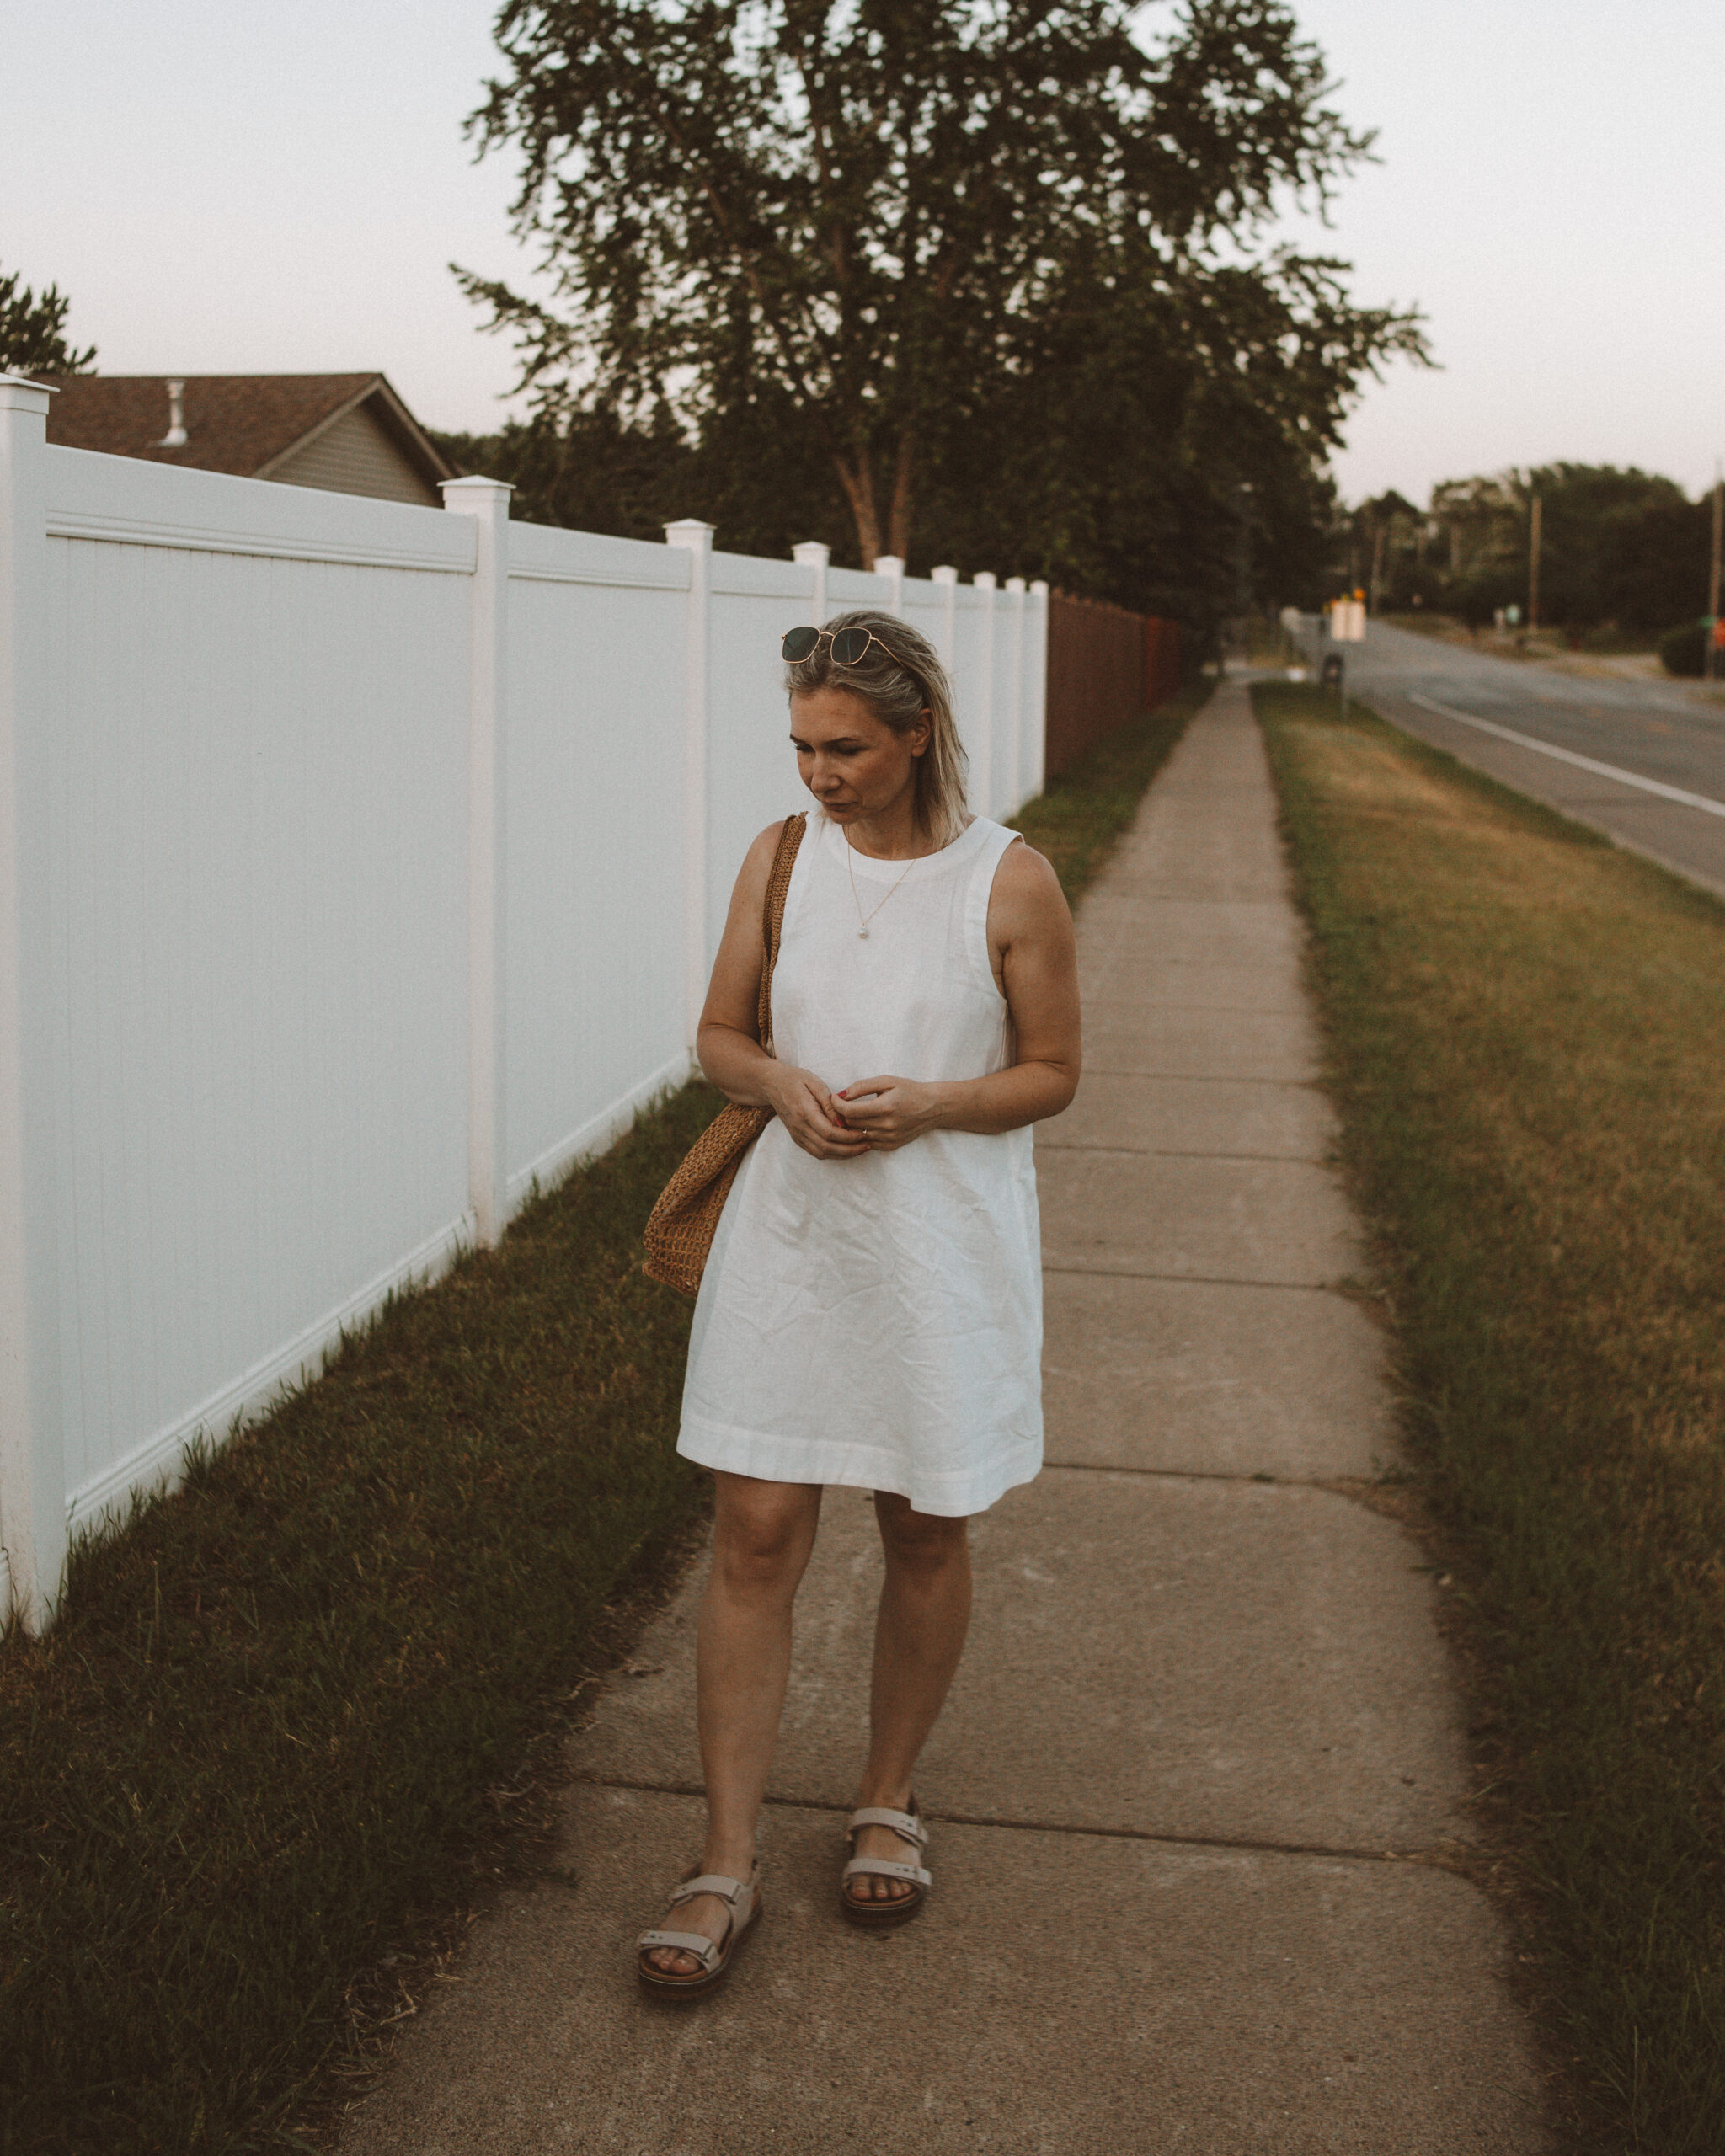 Karin Emily wears one of her favorite hot weather staples - a little white linen dress